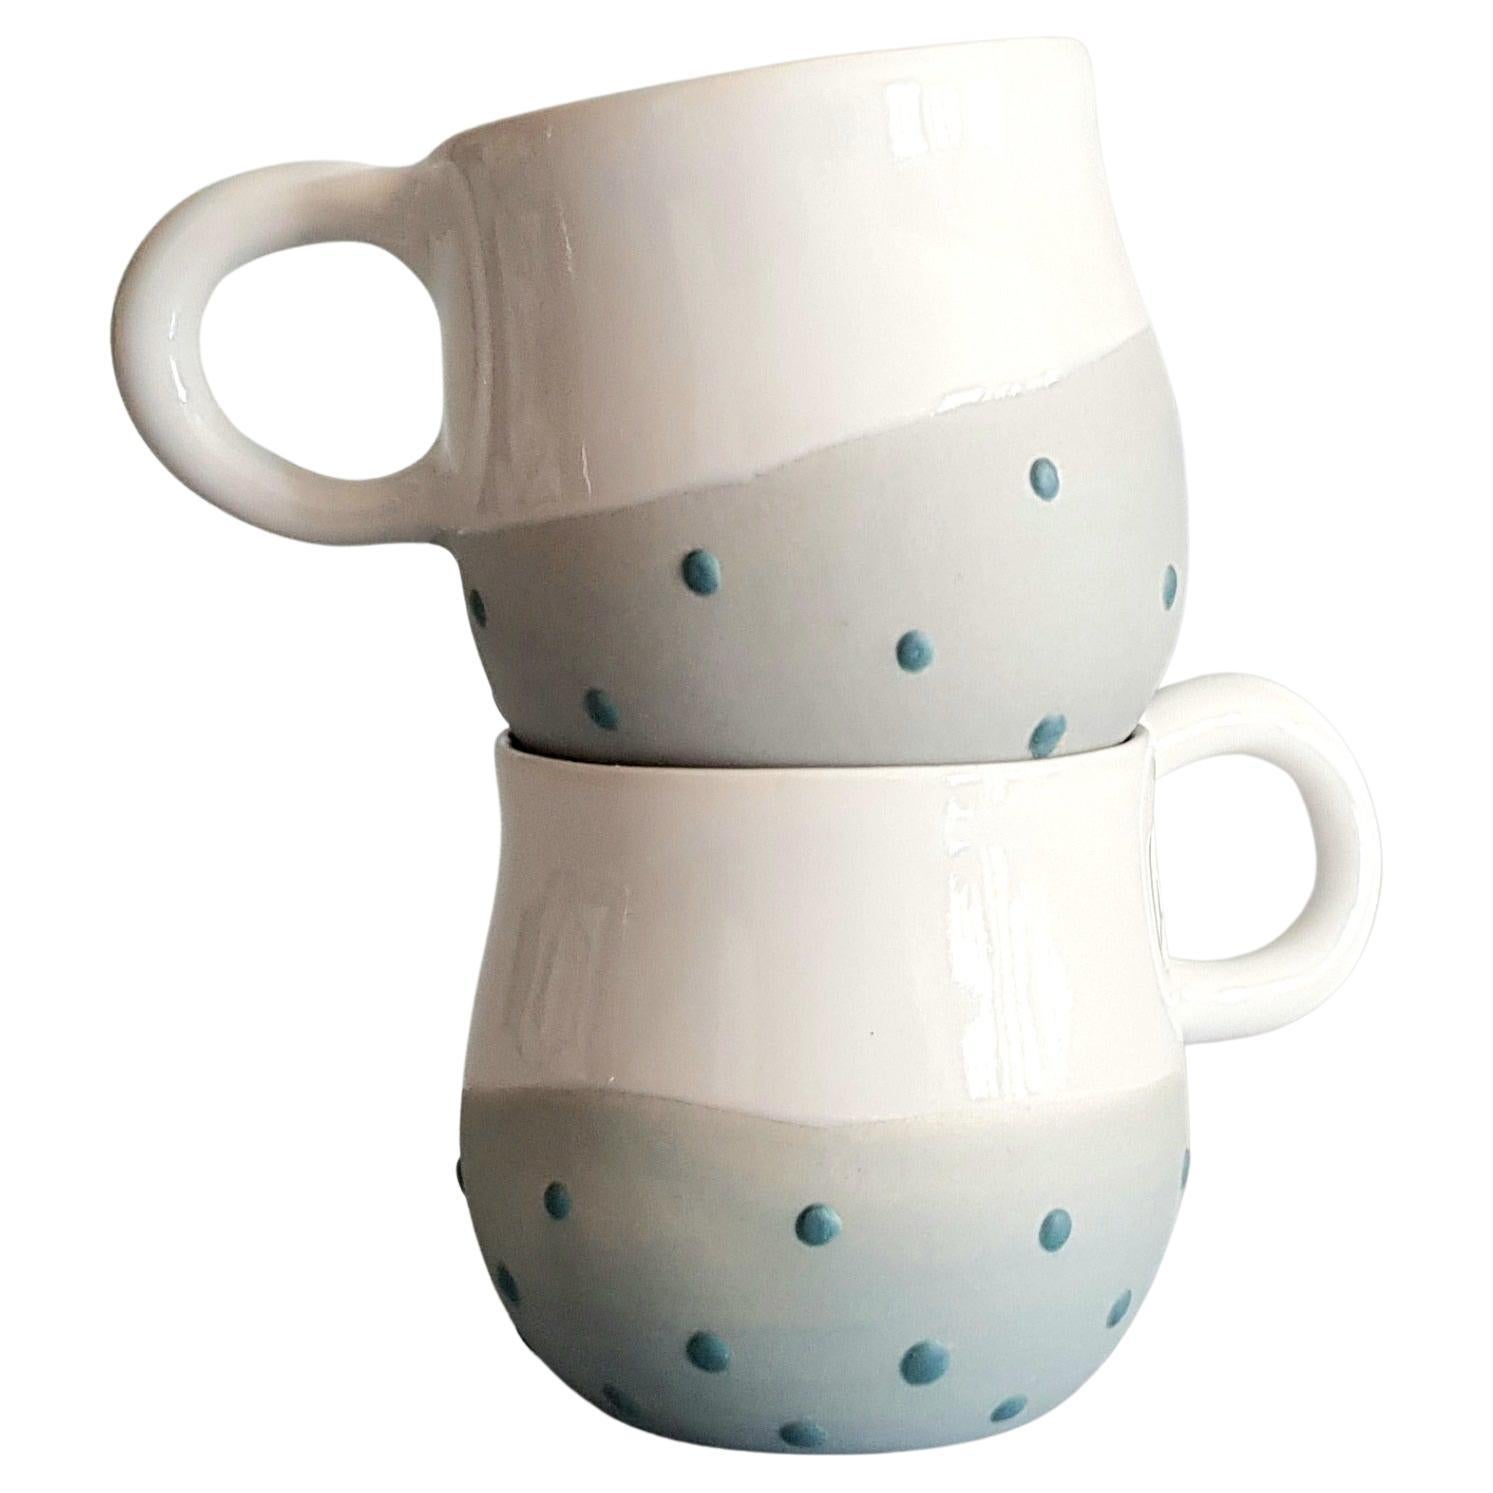 Amélie Handcrafted Milk Jug, Handmade in Italy 2021, Choose Size/Colours For Sale